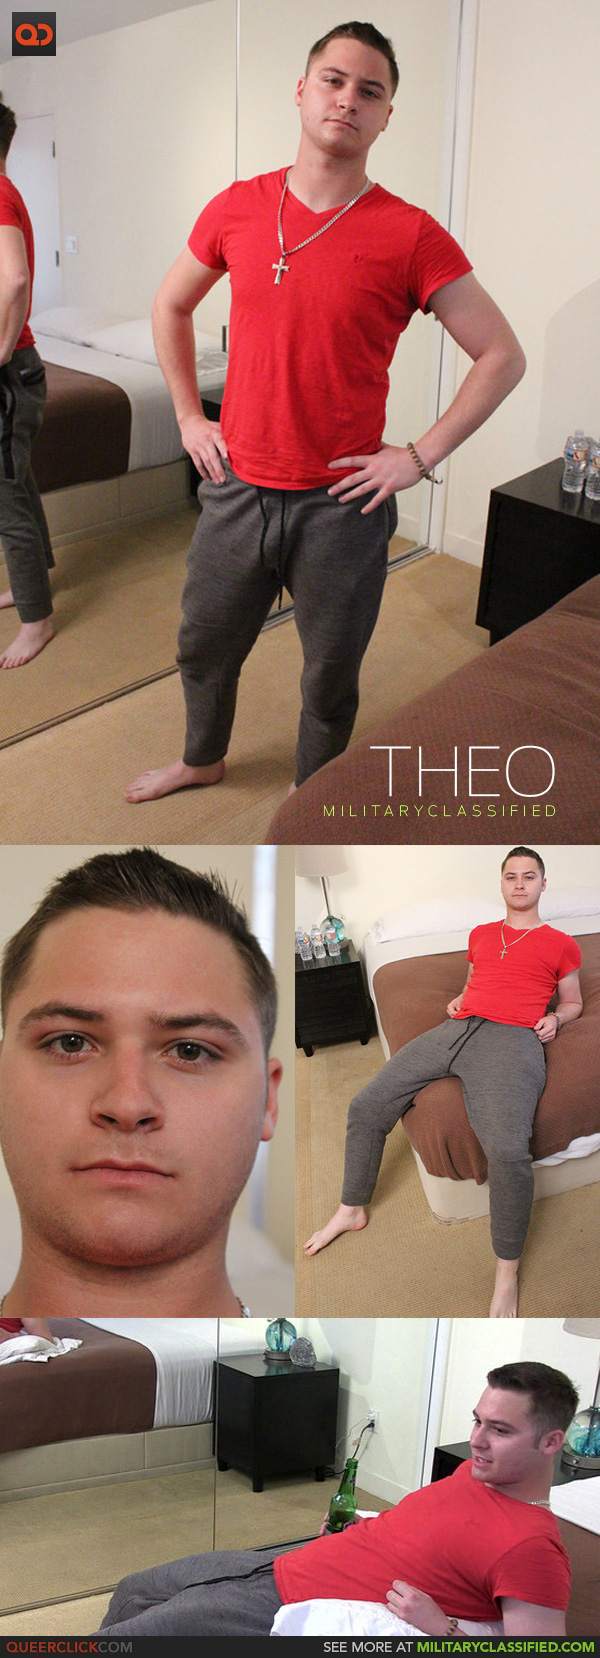 Military Classified: Theo